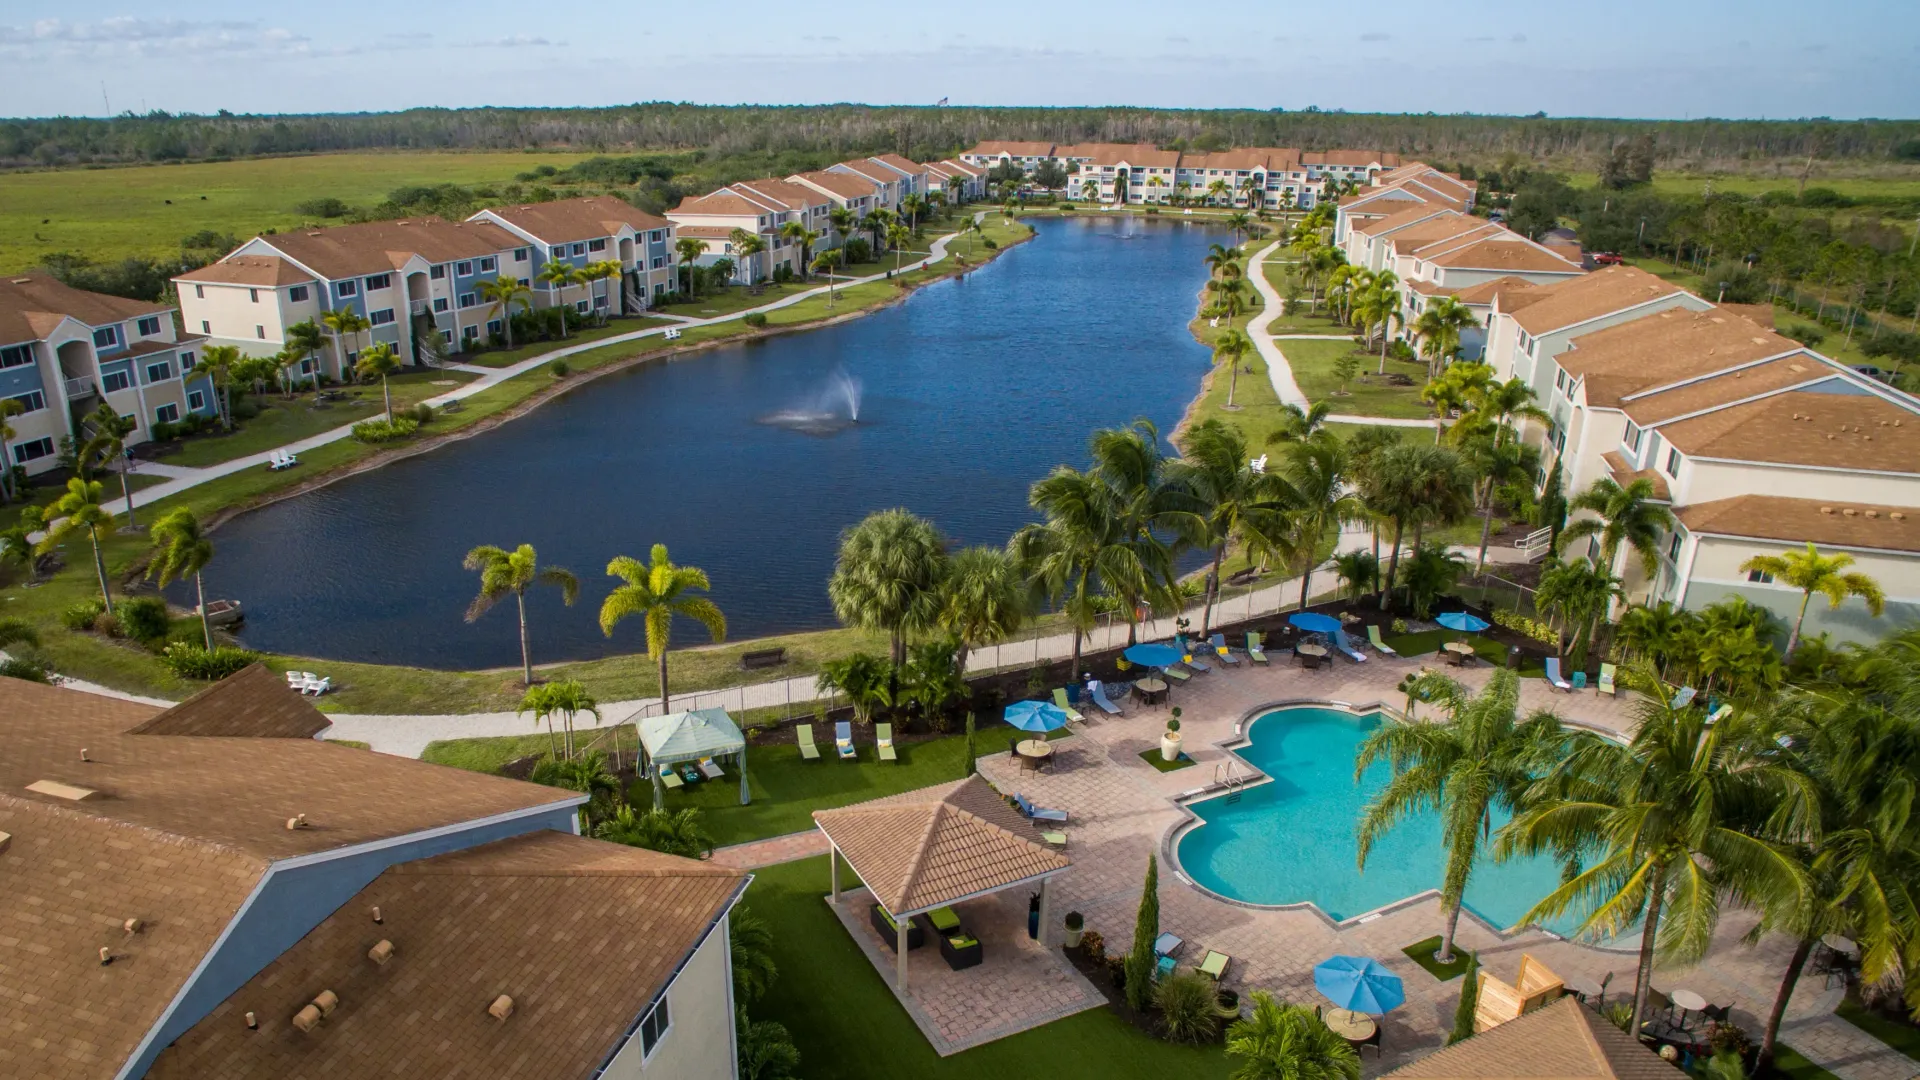 An aerial view of the community, showcasing charming lakeside apartments, lush palm trees, and Adirondack chairs by the water.